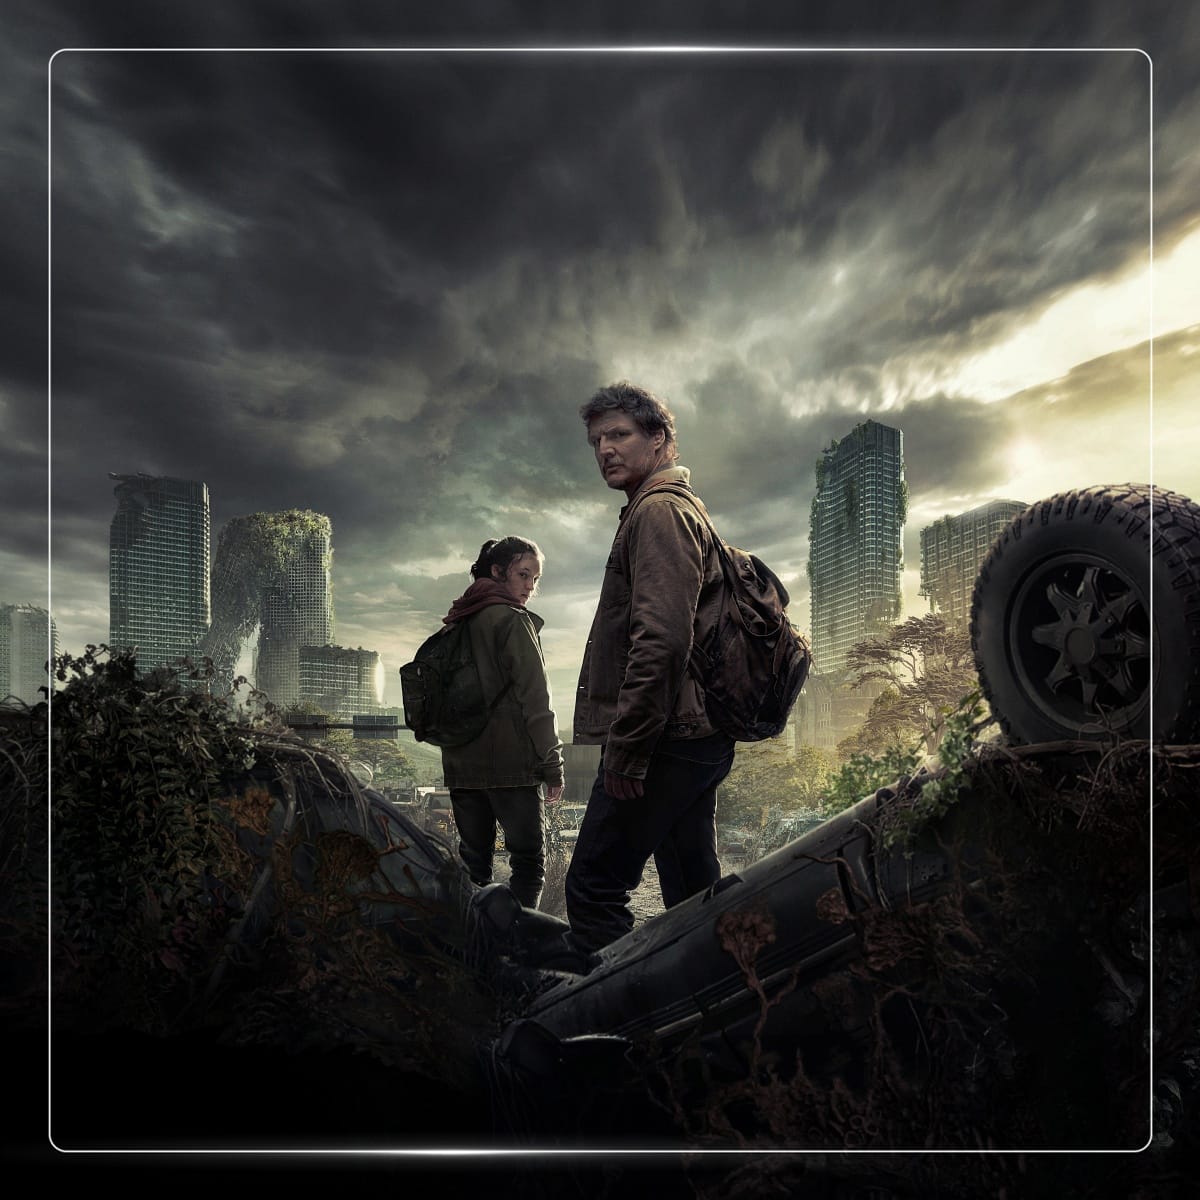 Promotional art for The Last of Us featuring Bella Ramsey as Ellie Williams and Pedro Pascal as Joel Miller